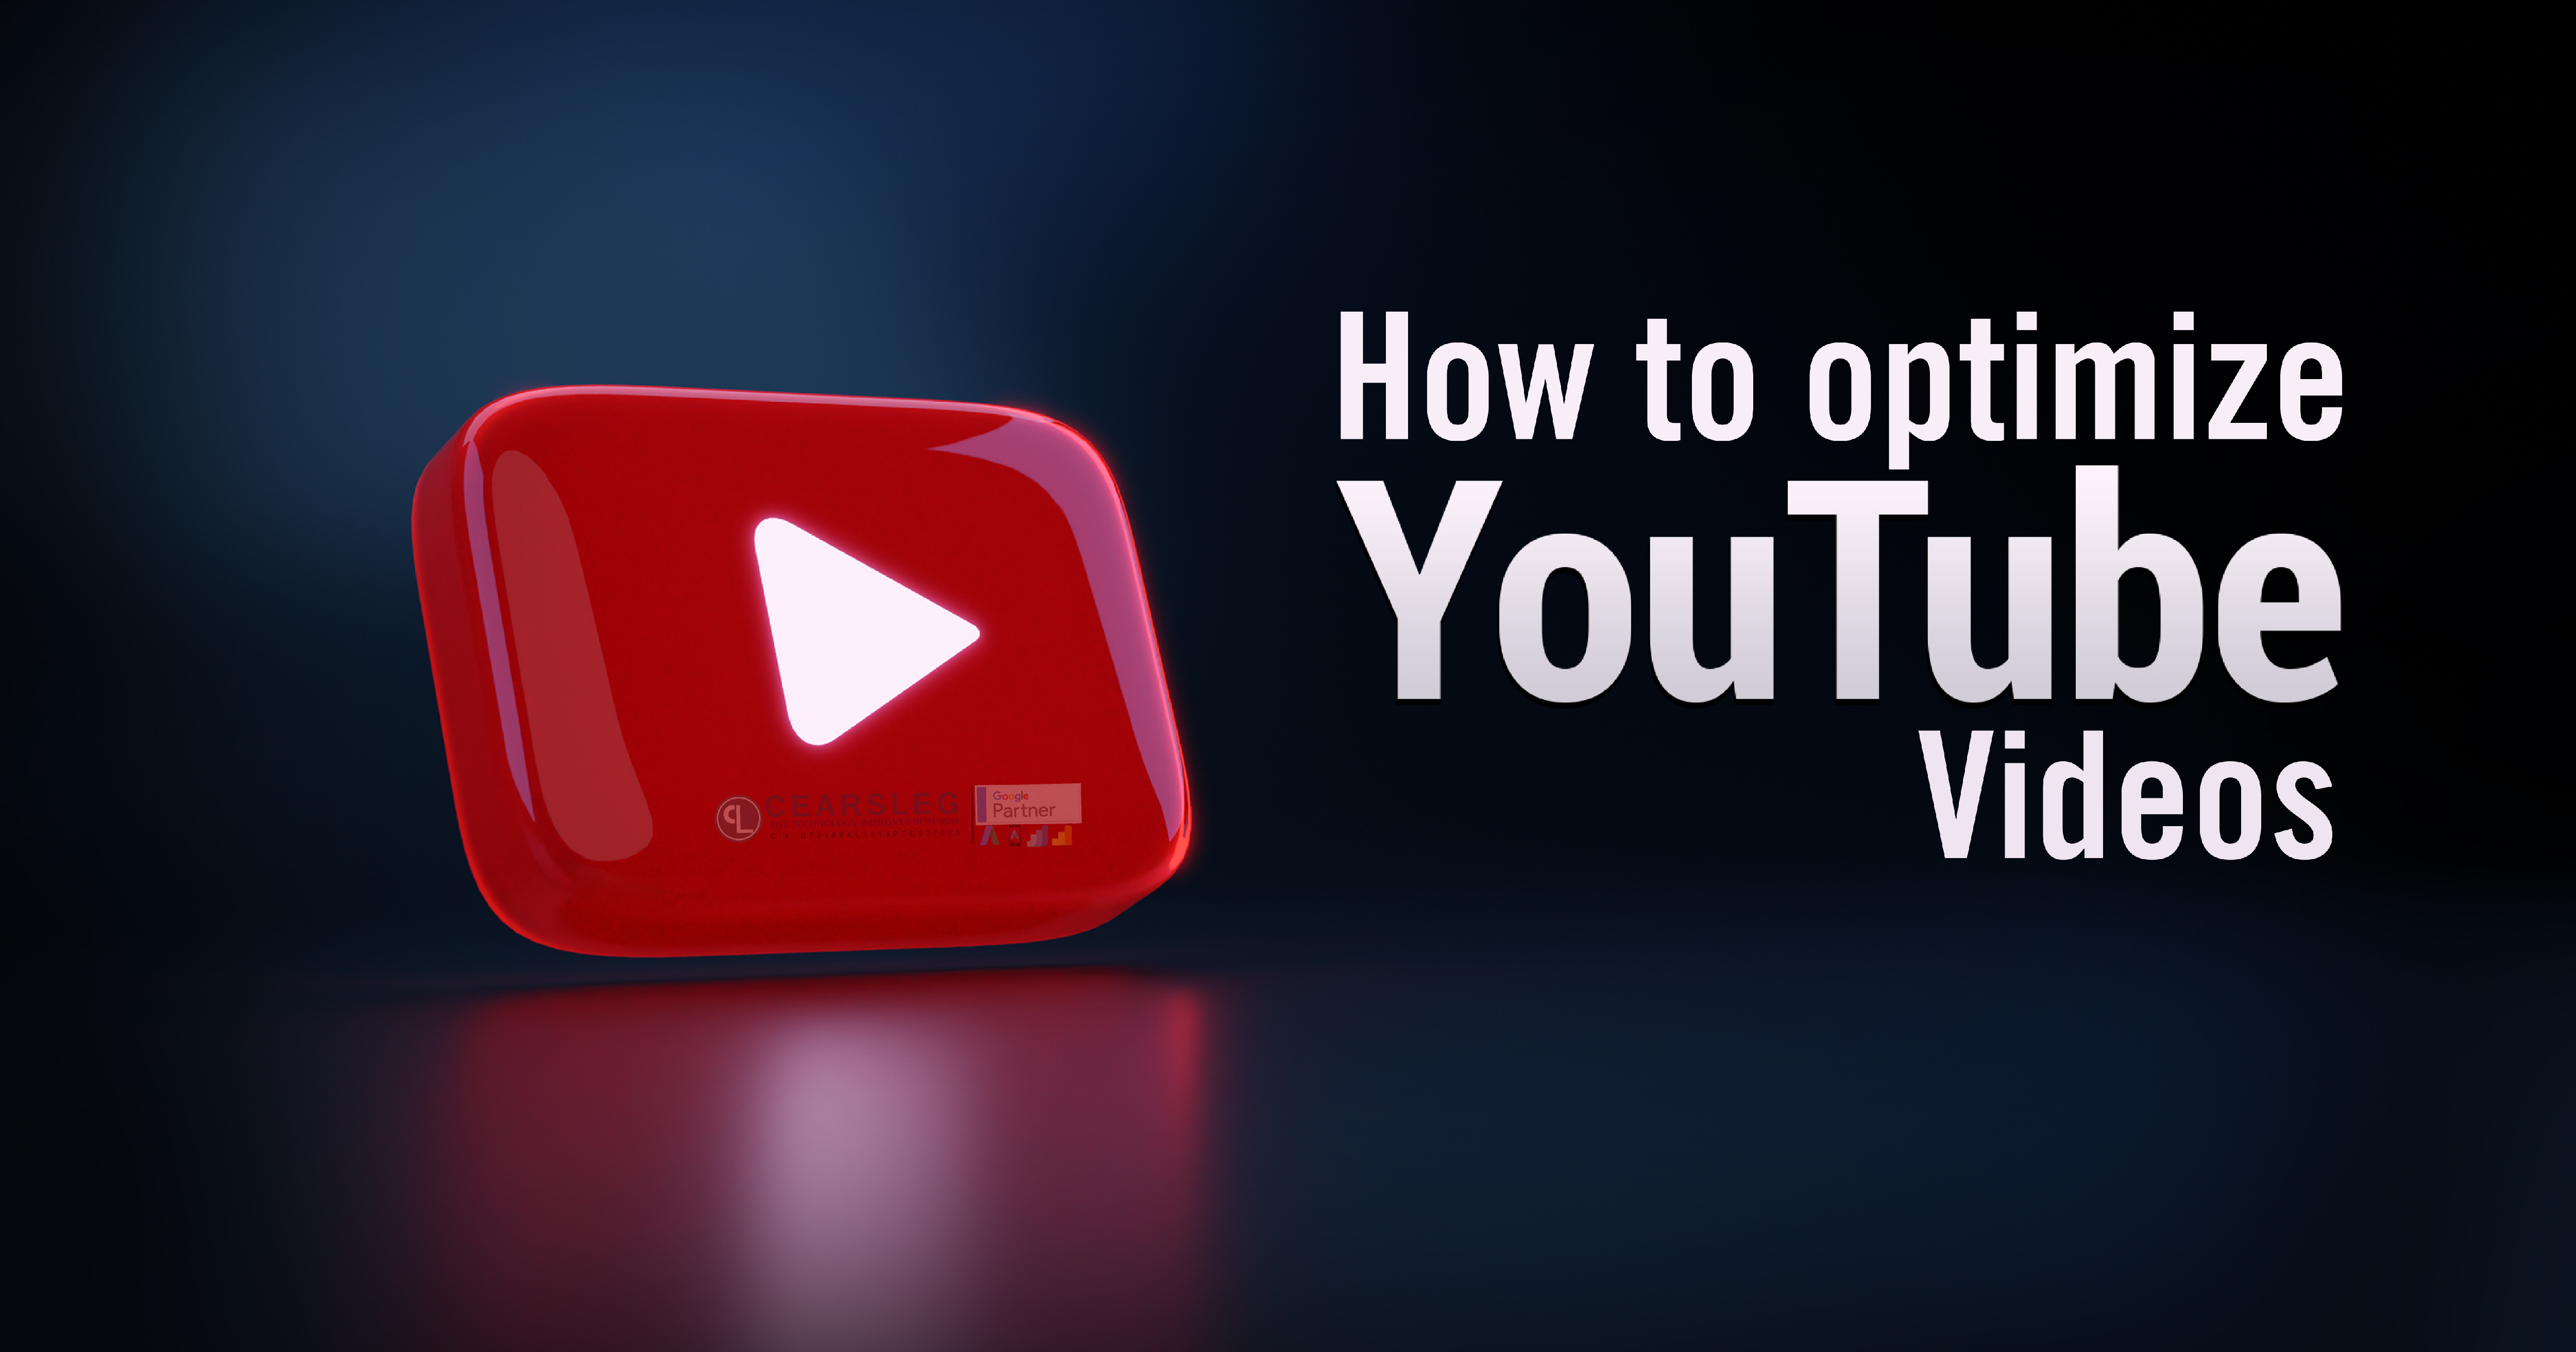 How to Optimize YouTube Videos